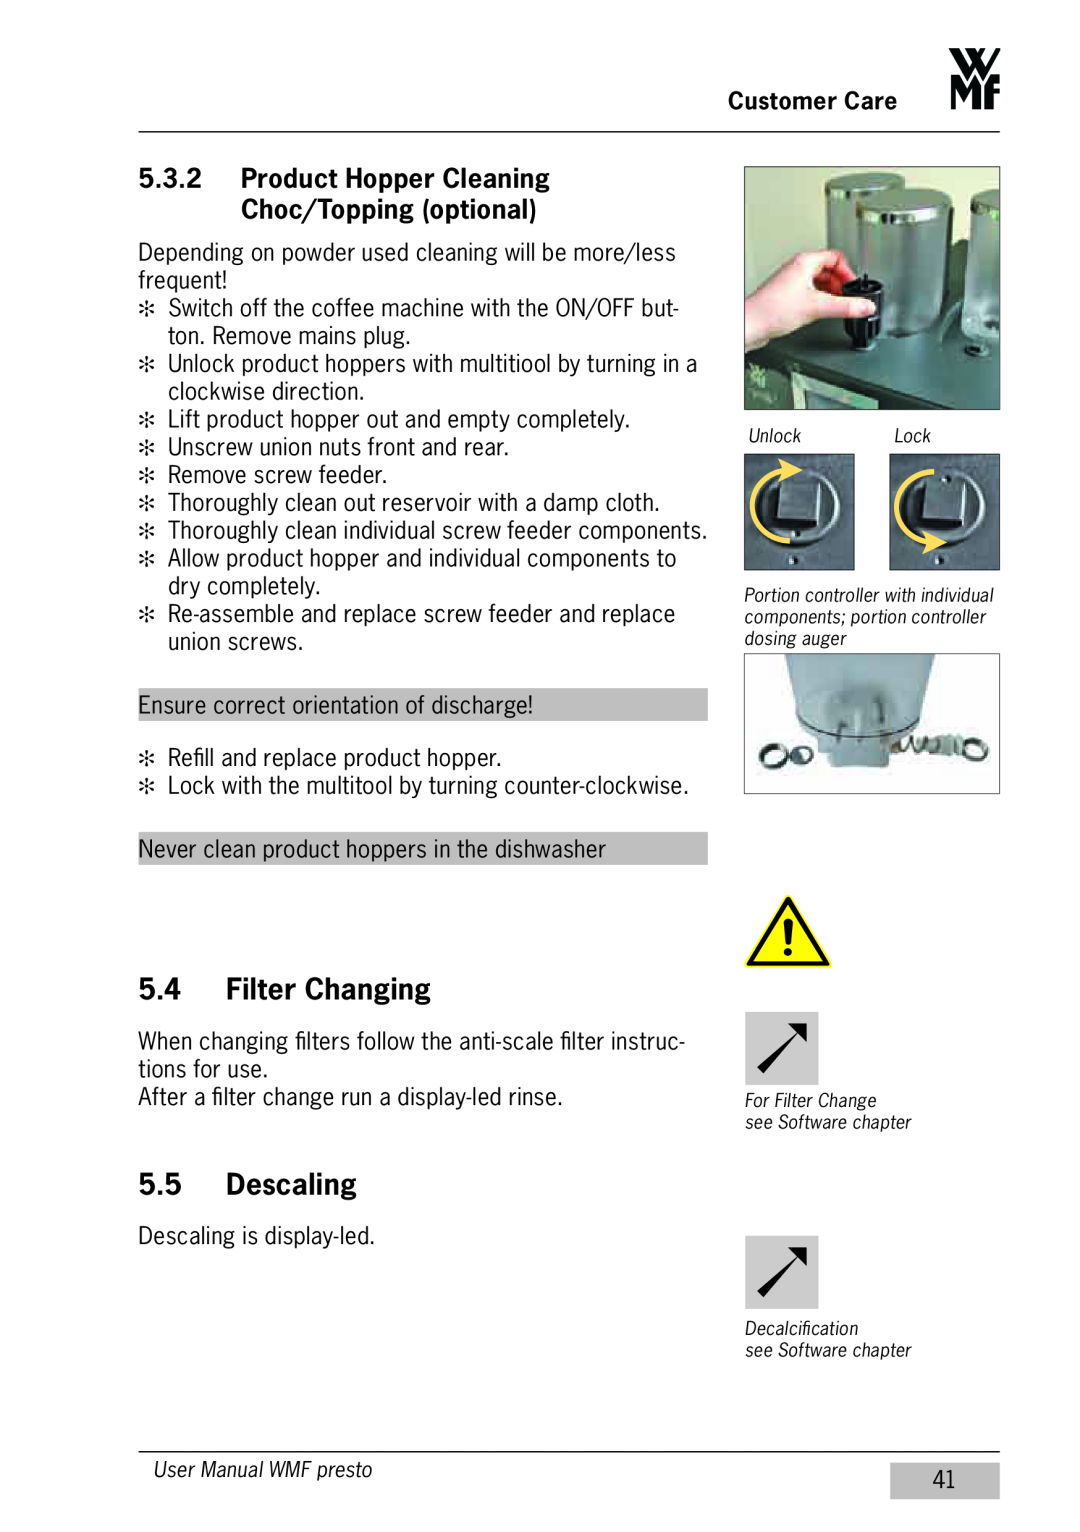 WMF Americas 1400 user manual Filter Changing, Descaling, Product Hopper Cleaning Choc/Topping optional, Customer Care 